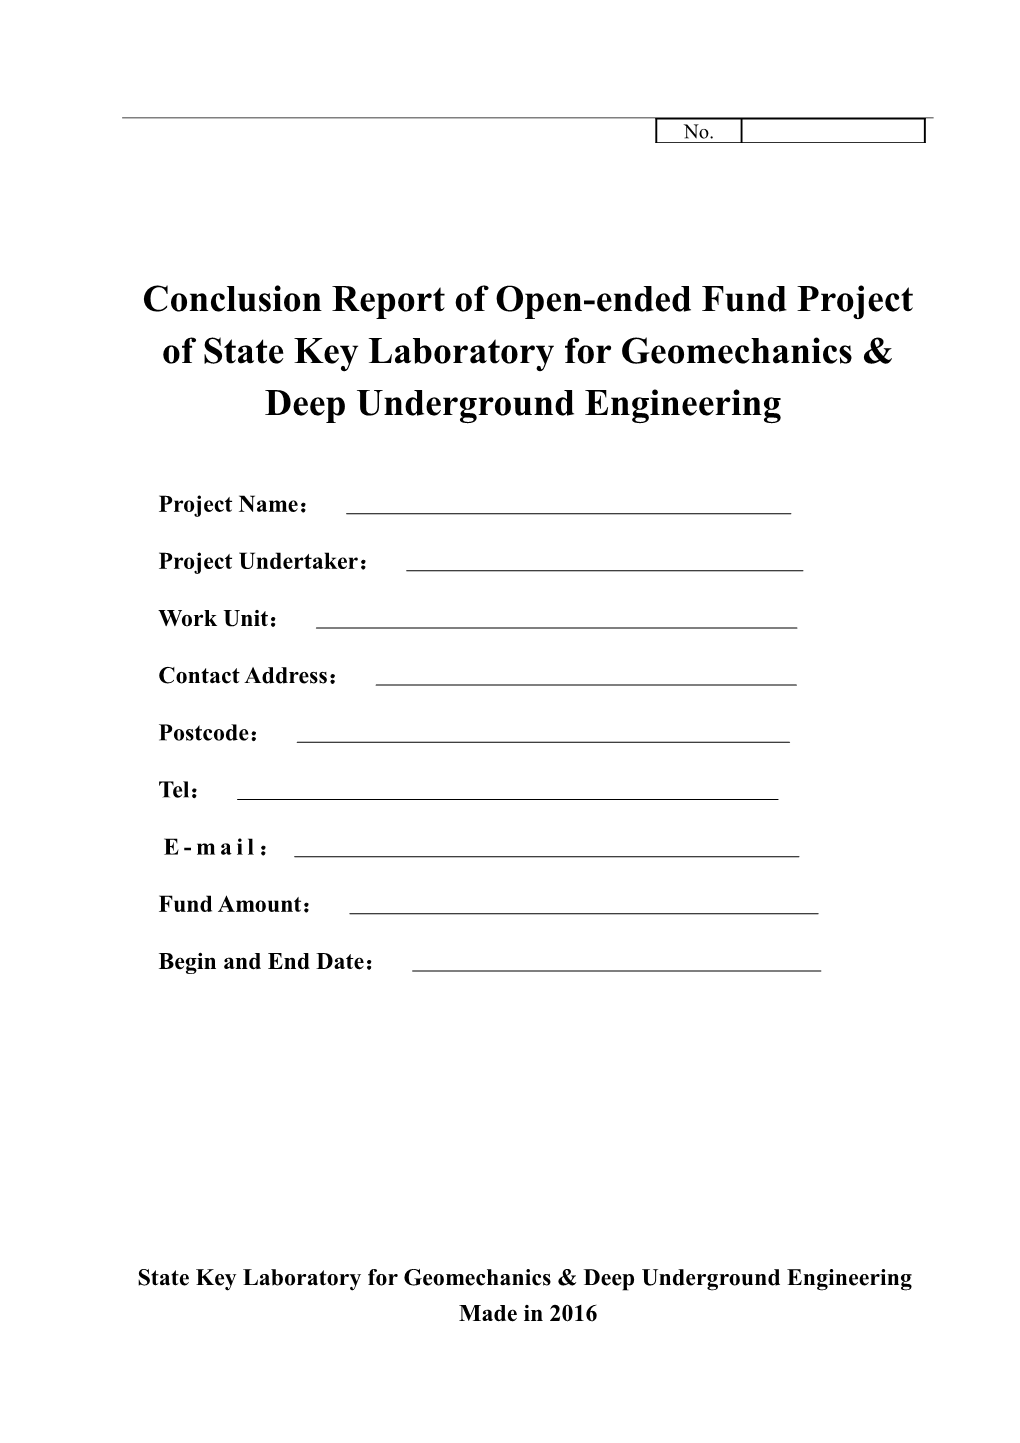 Conclusion Report of Open-Ended Fund Project of State Key Laboratory for Geomechanics